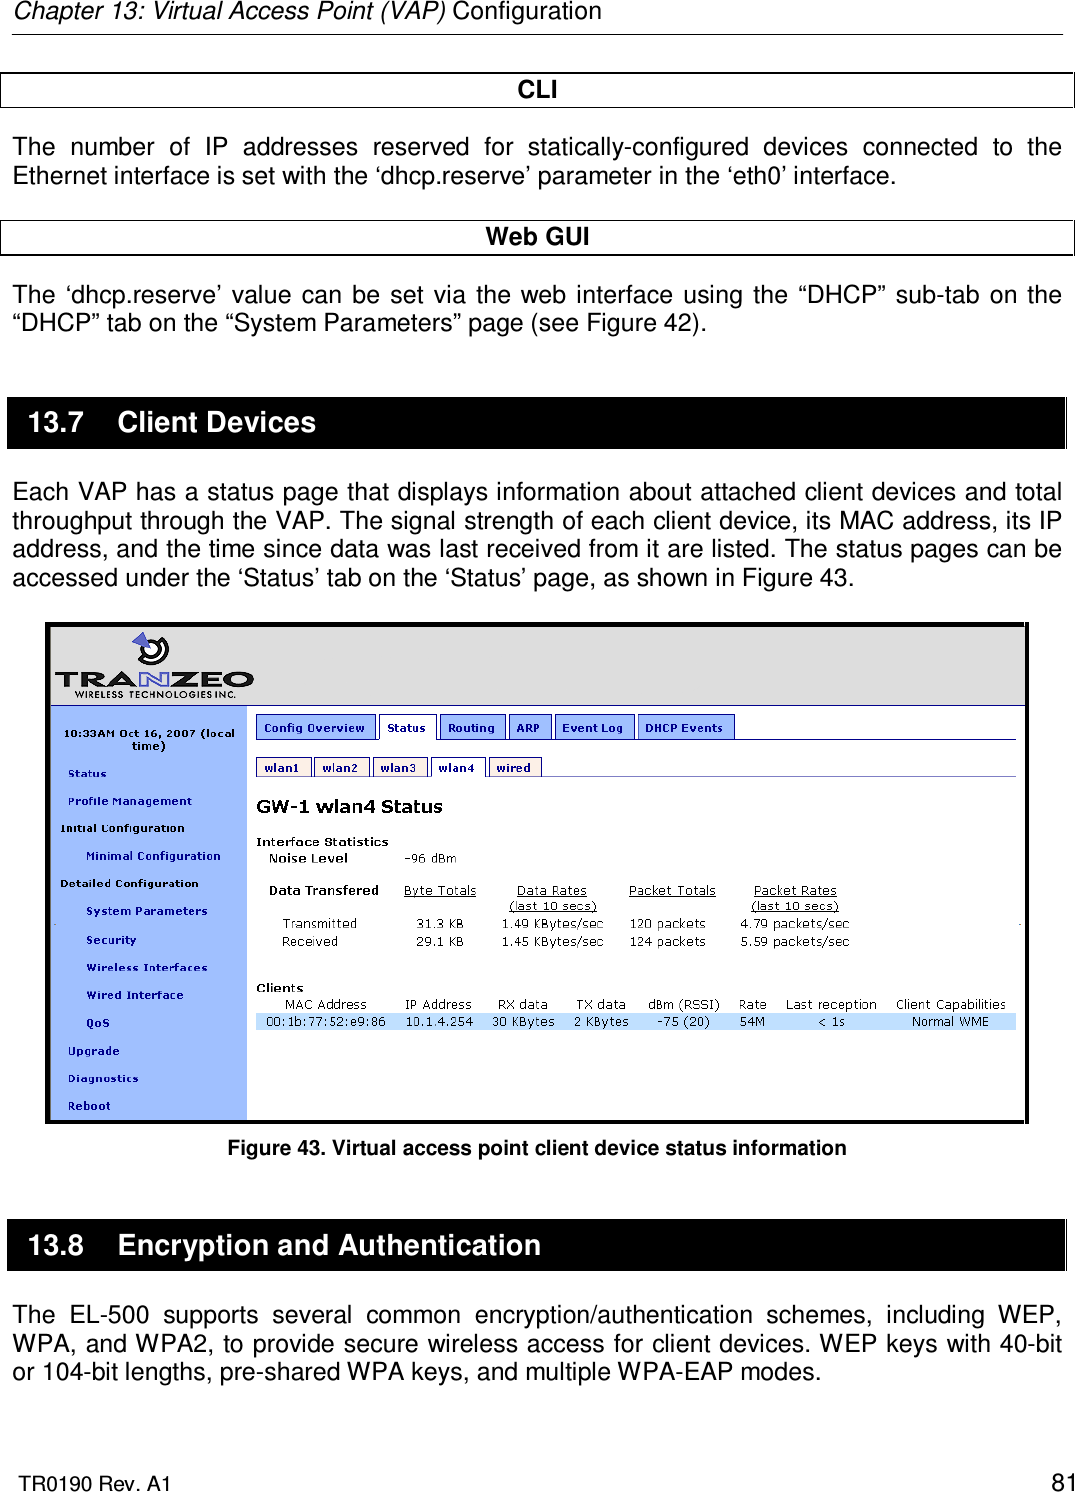 Chapter 13: Virtual Access Point (VAP) Configuration  TR0190 Rev. A1    81 CLI The  number  of  IP  addresses  reserved  for  statically-configured  devices  connected  to  the Ethernet interface is set with the ‘dhcp.reserve’ parameter in the ‘eth0’ interface.  Web GUI The  ‘dhcp.reserve’  value  can  be set  via  the web  interface  using  the  “DHCP”  sub-tab on the “DHCP” tab on the “System Parameters” page (see Figure 42).  13.7  Client Devices Each VAP has a status page that displays information about attached client devices and total throughput through the VAP. The signal strength of each client device, its MAC address, its IP address, and the time since data was last received from it are listed. The status pages can be accessed under the ‘Status’ tab on the ‘Status’ page, as shown in Figure 43.   Figure 43. Virtual access point client device status information 13.8  Encryption and Authentication The  EL-500  supports  several  common  encryption/authentication  schemes,  including  WEP, WPA, and WPA2, to provide secure wireless access for client devices. WEP keys with 40-bit or 104-bit lengths, pre-shared WPA keys, and multiple WPA-EAP modes.   